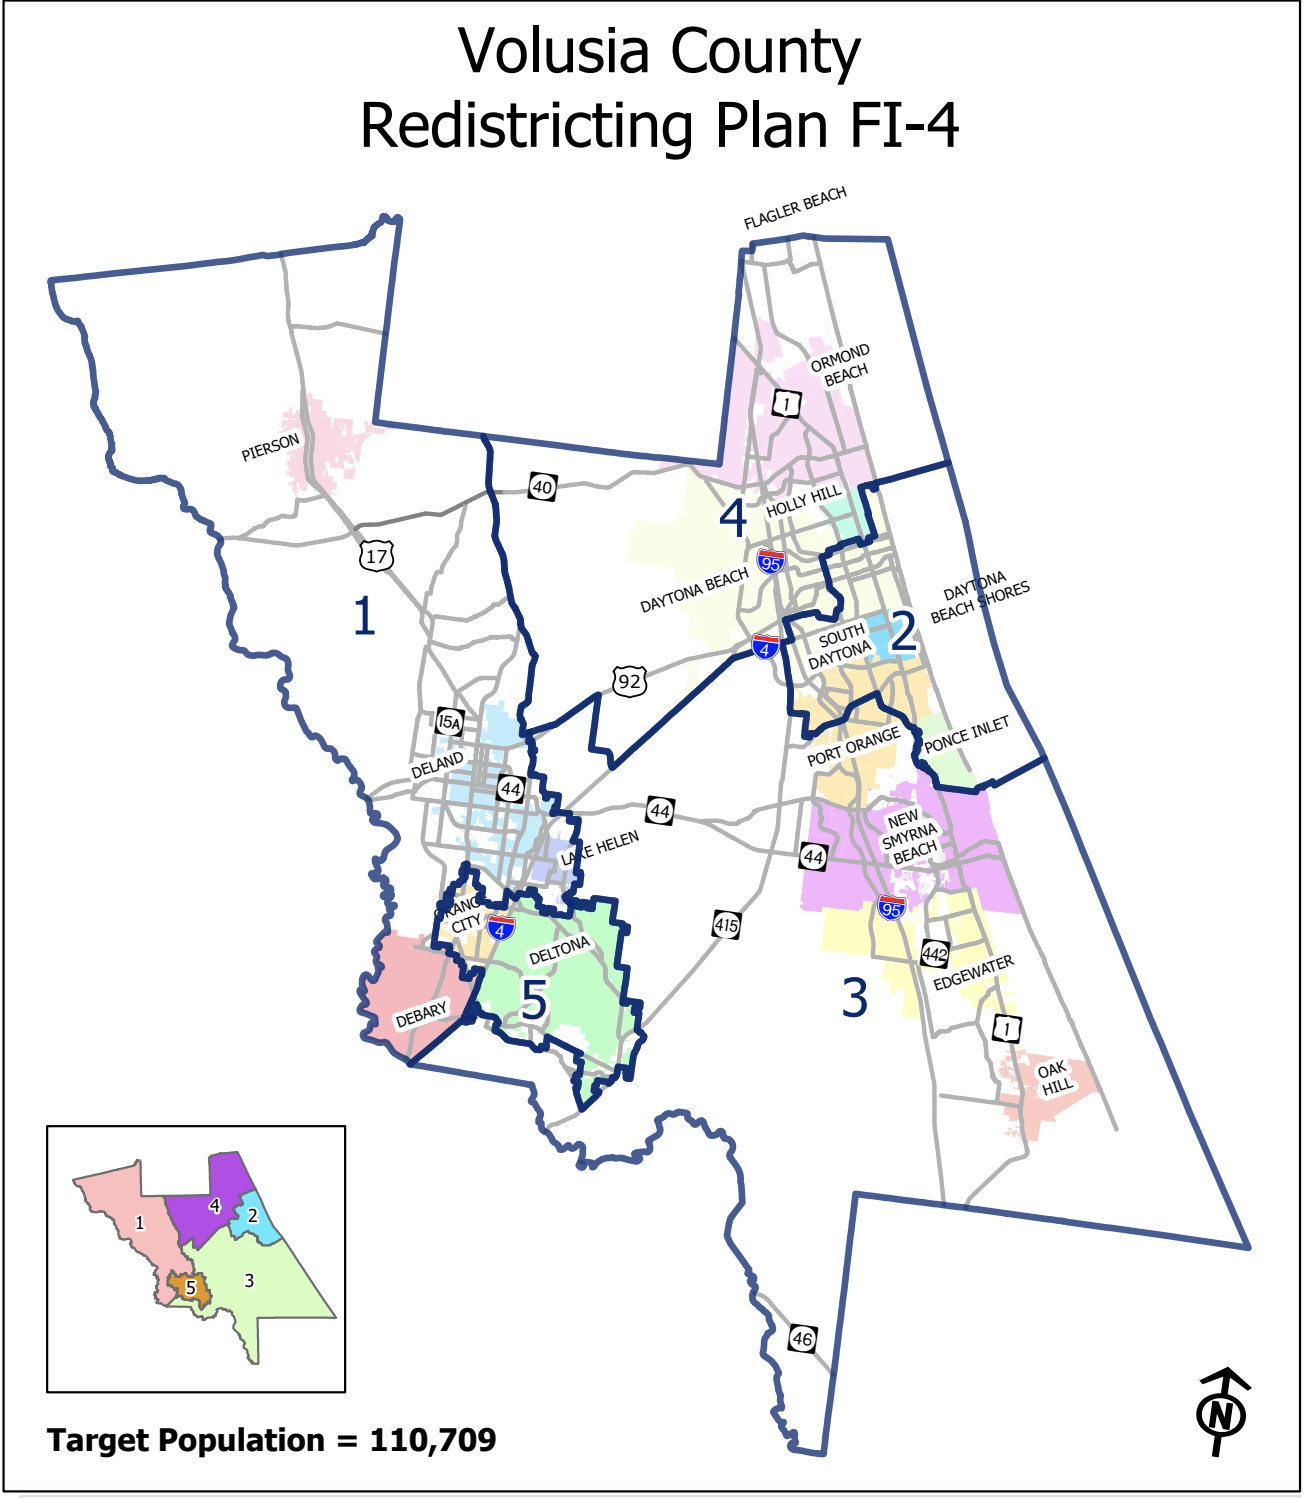 Redistricting Plan FI-4. Courtesy of Volusia County Government